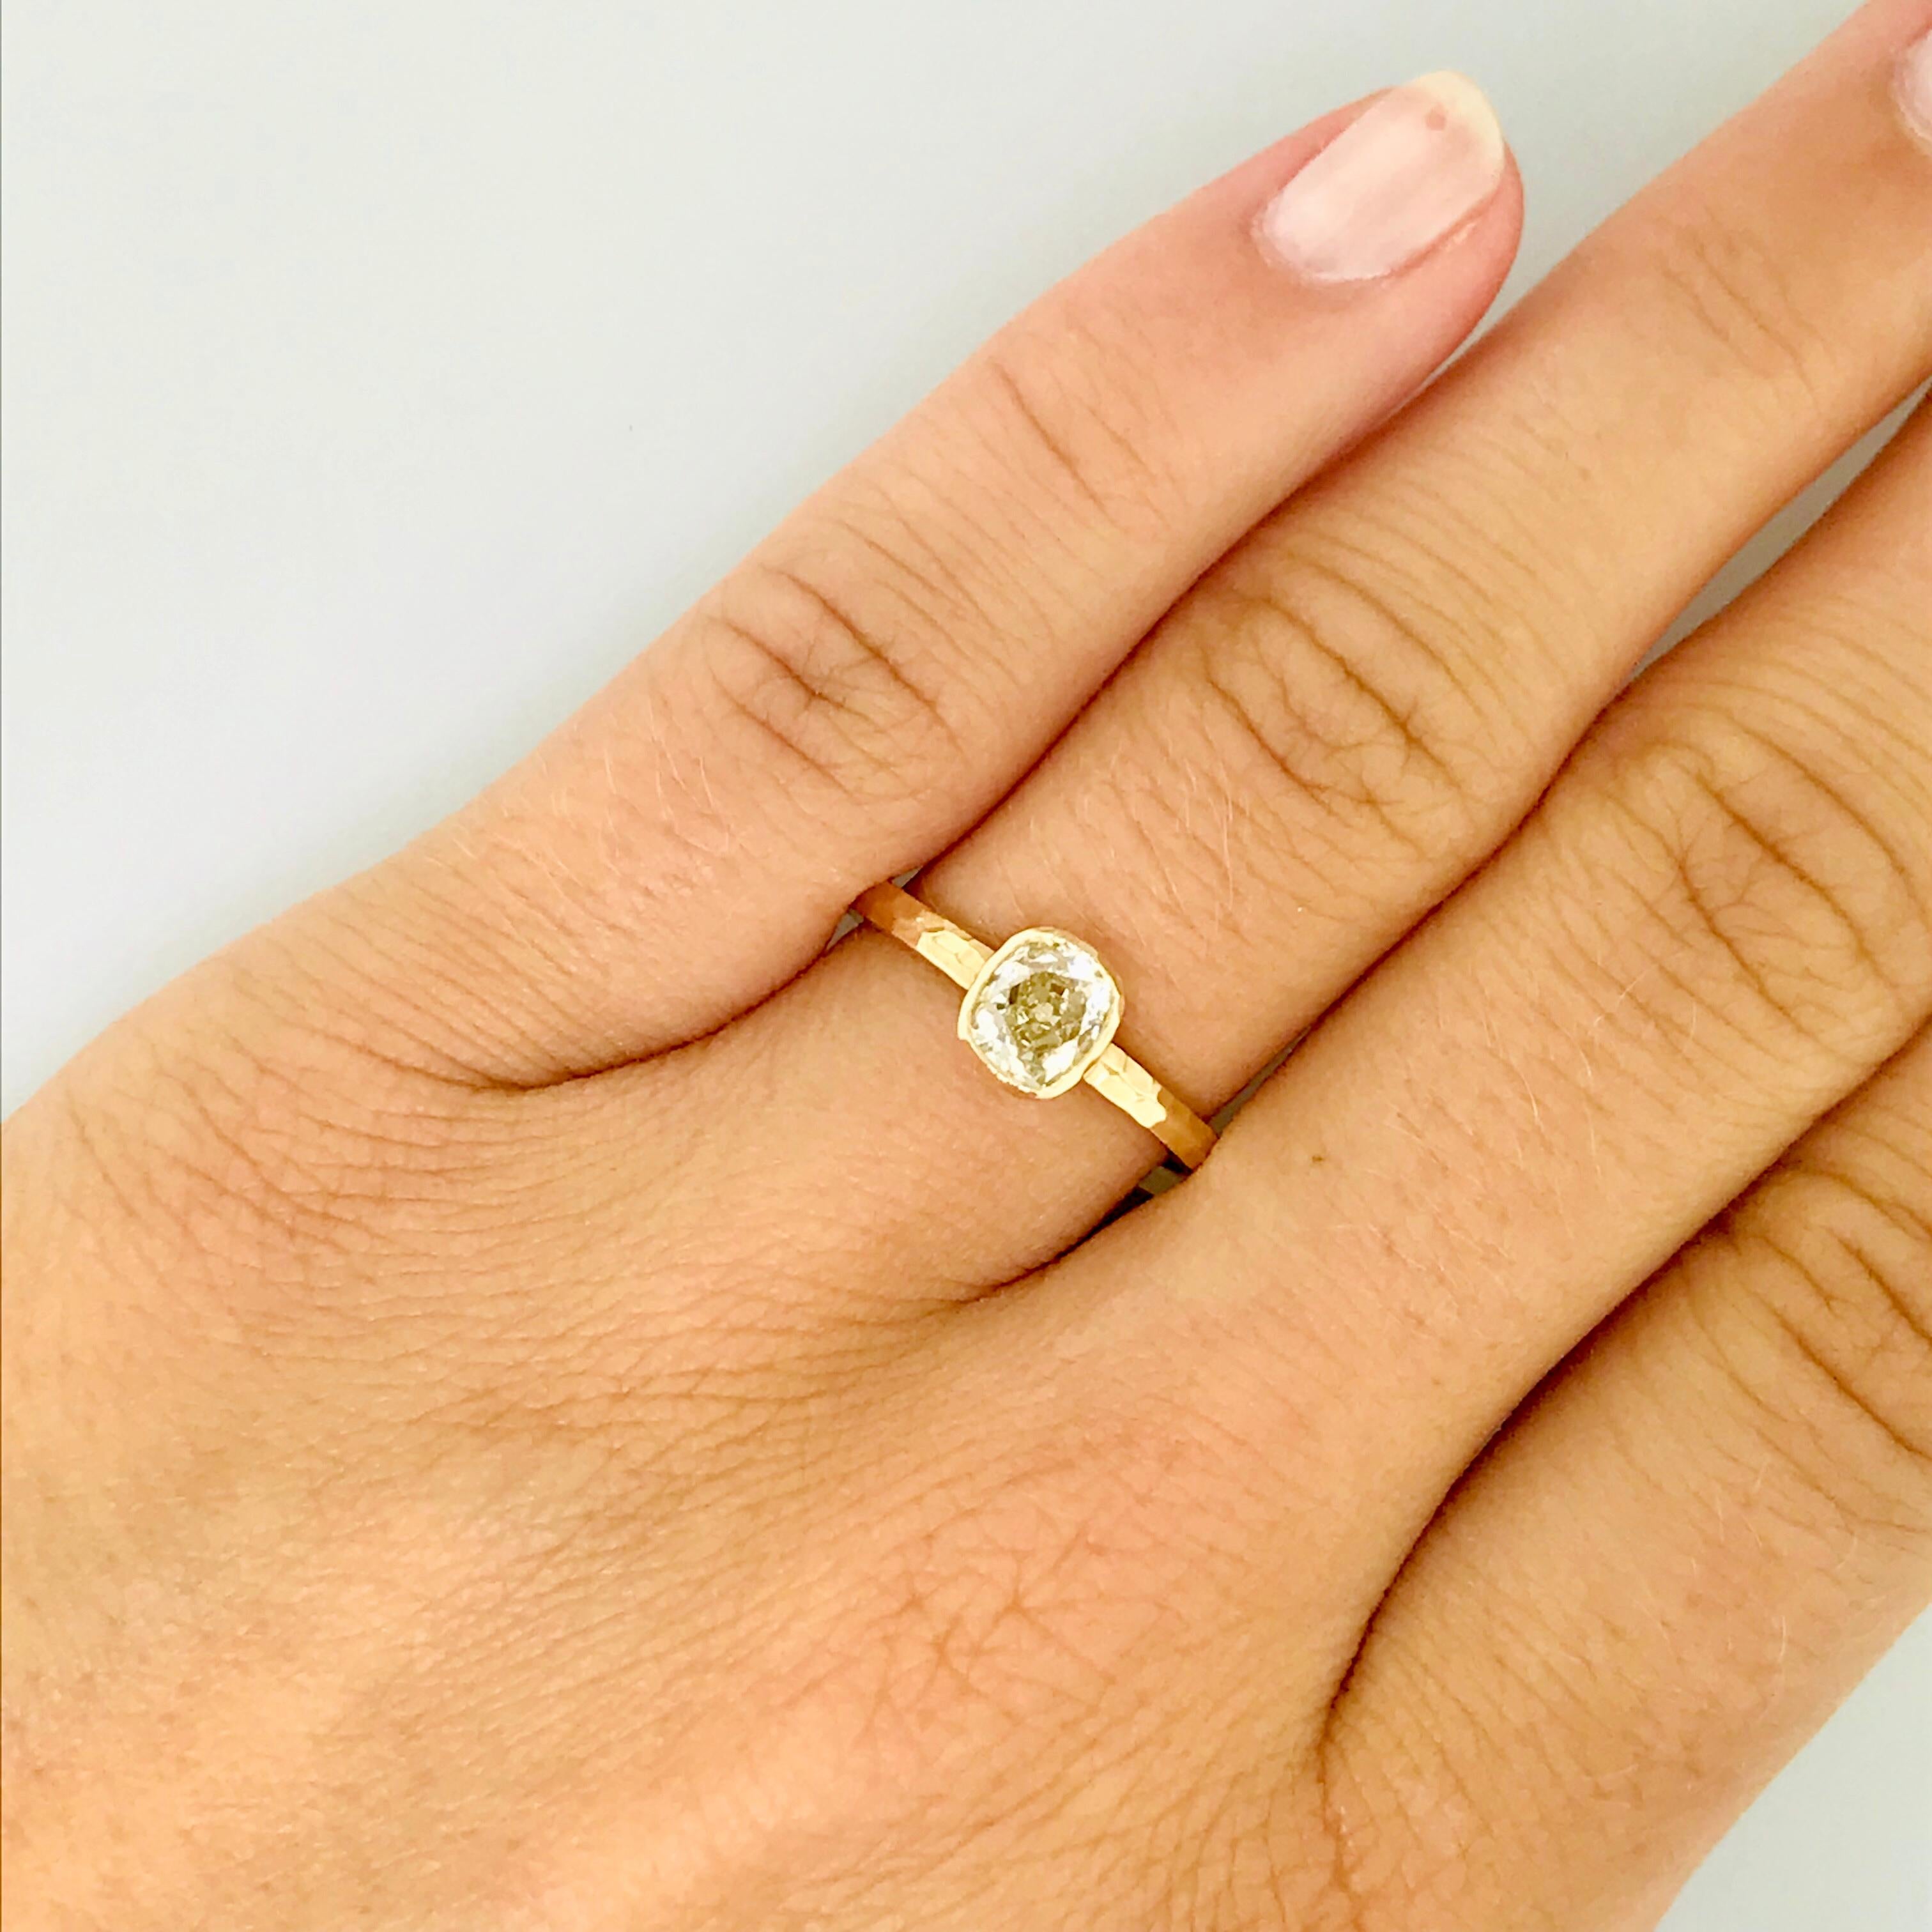 Rare Victorian Old Mine Diamond Classic Solitaire Engagement Ring with Modern Design

The handcrafted solitaire engagement ring is truly ONE OF A KIND. Created by Five Star Jewelry in Austin, Texas this ring's materials are 100% recycled. Made with